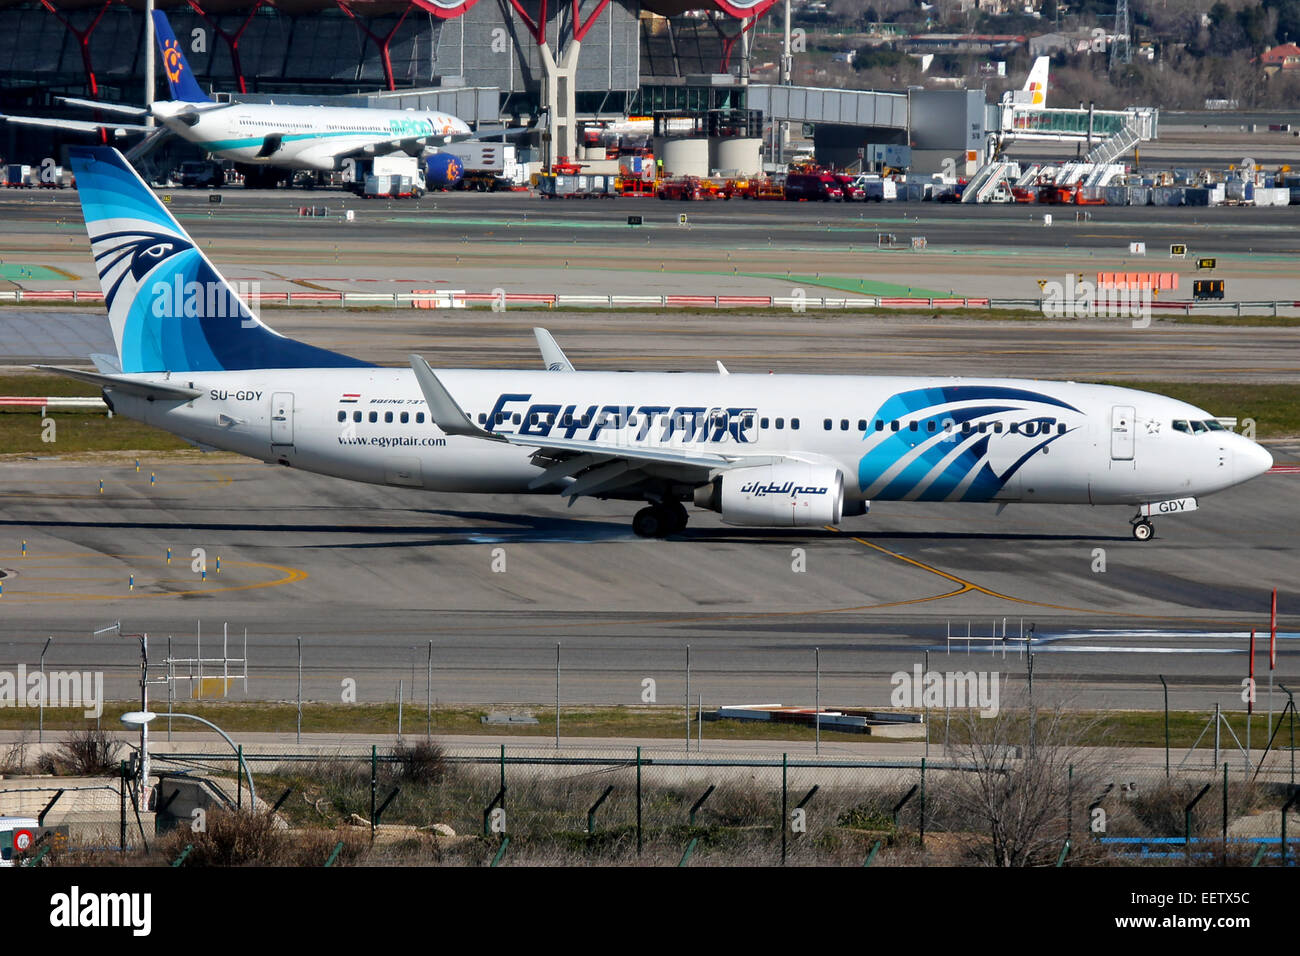 Egyptair Boeing 737-800 taxis to stand at Madrid airport. Stock Photo